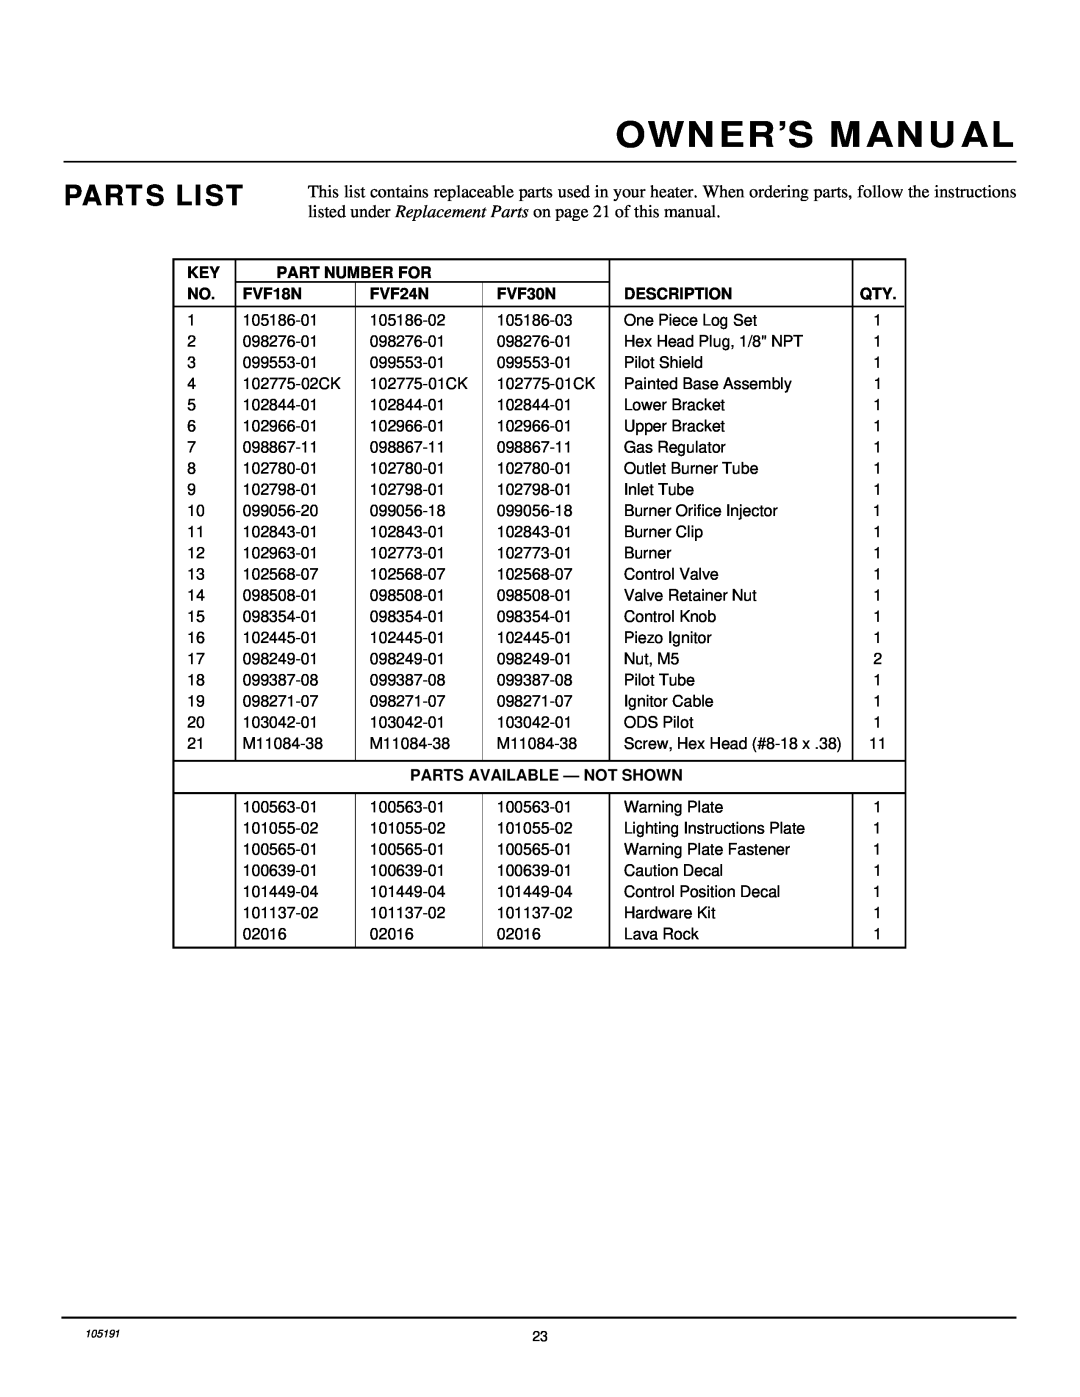 Desa FVF24N, and FVF30N Parts List, Part Number For, FVF18N, Description, Parts Available - Not Shown 